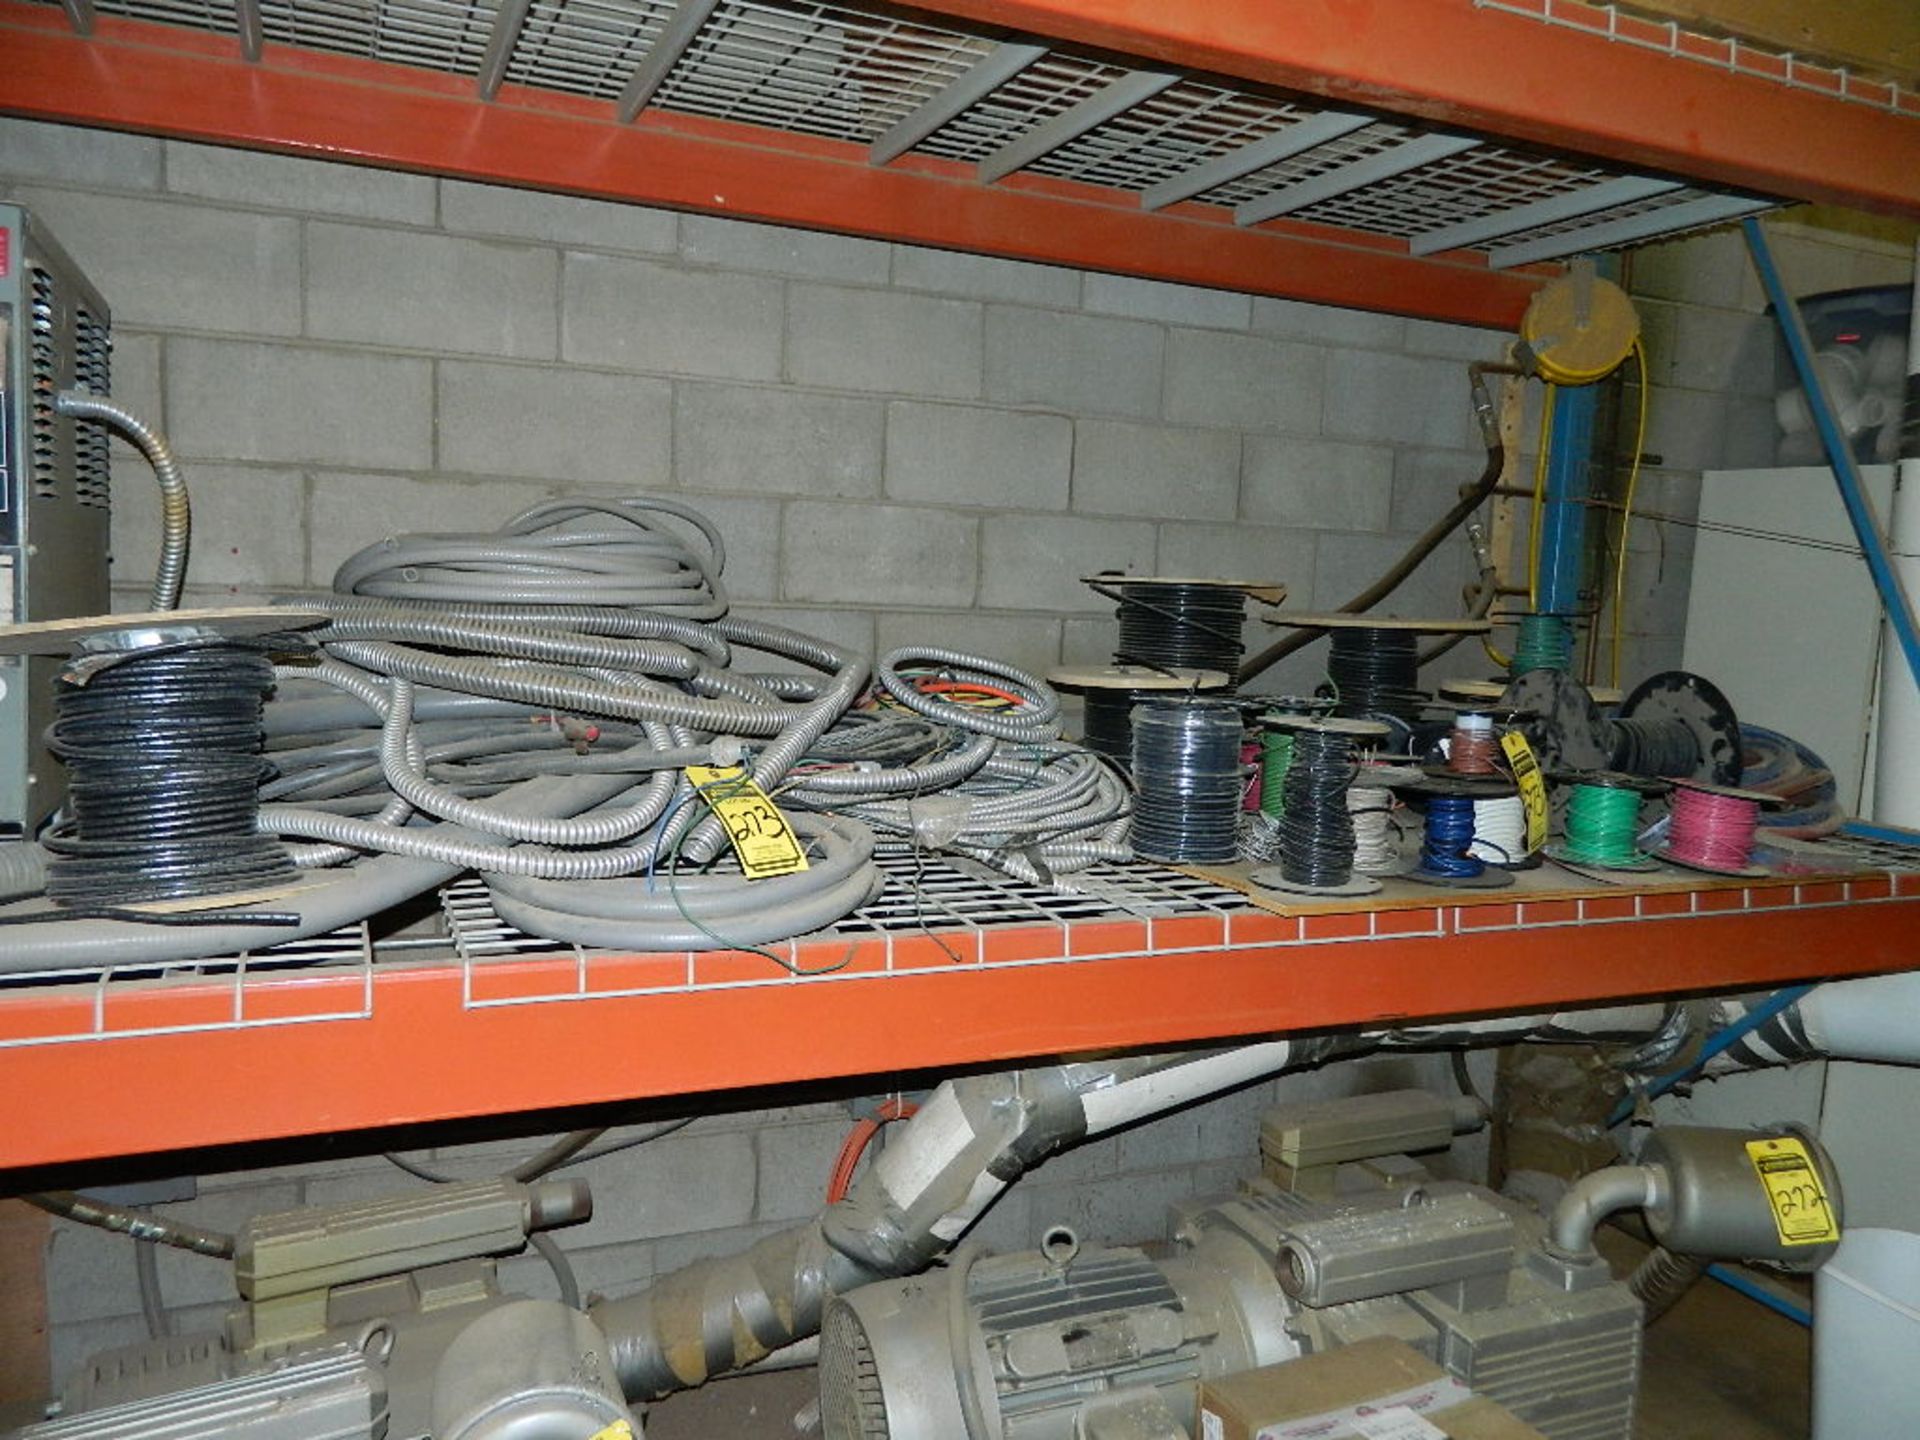 LOT OF ELECTRICAL WIRING ON MIDDLE SHELF OF PALLET RACK - WIRING & CONDUIT ONLY